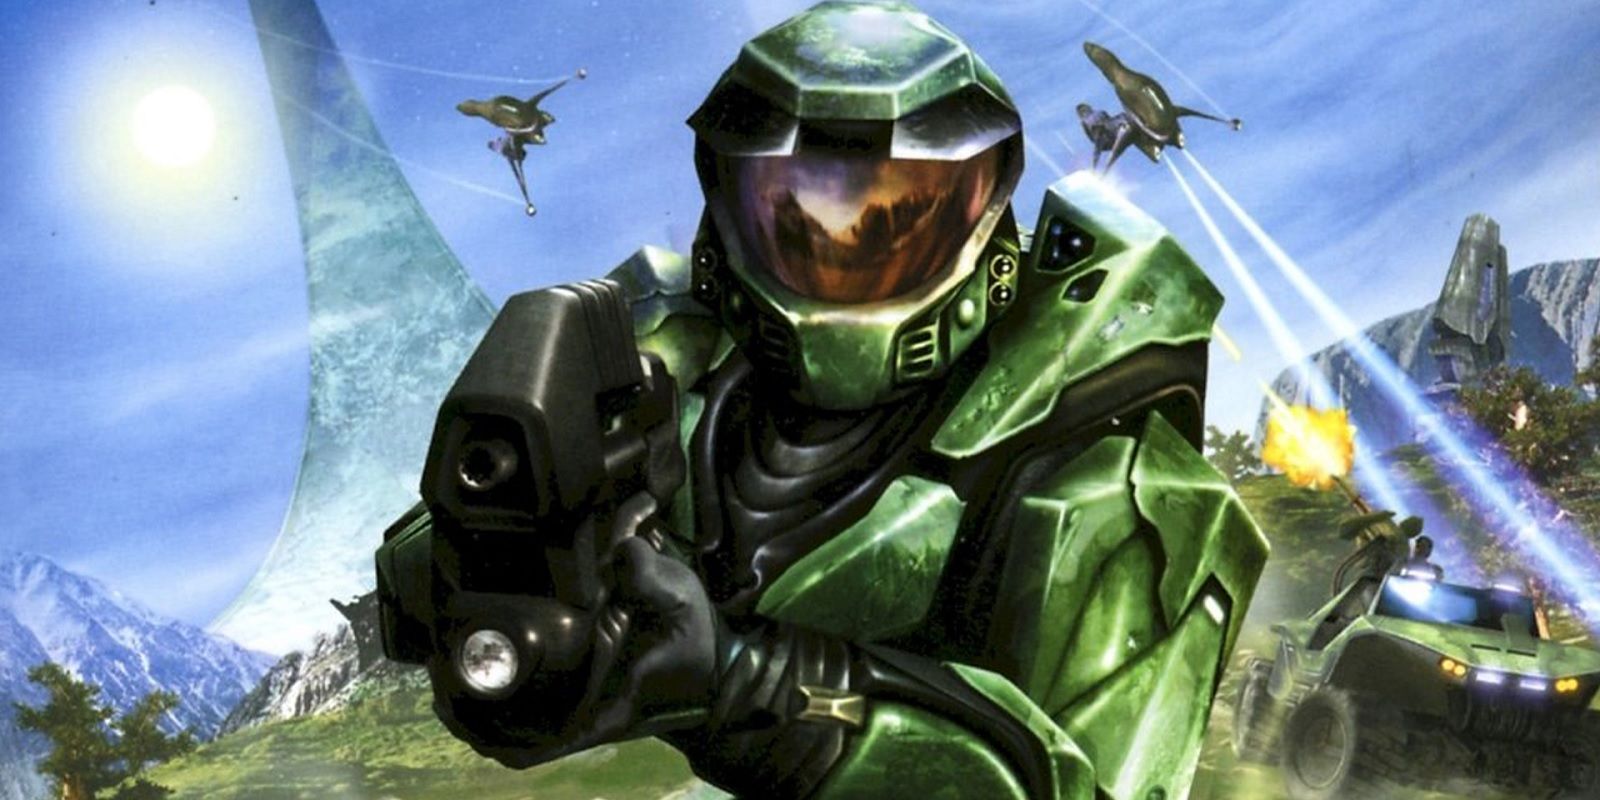 The Iconic Halo Combat Evolved Game Cover featuring Master Chief